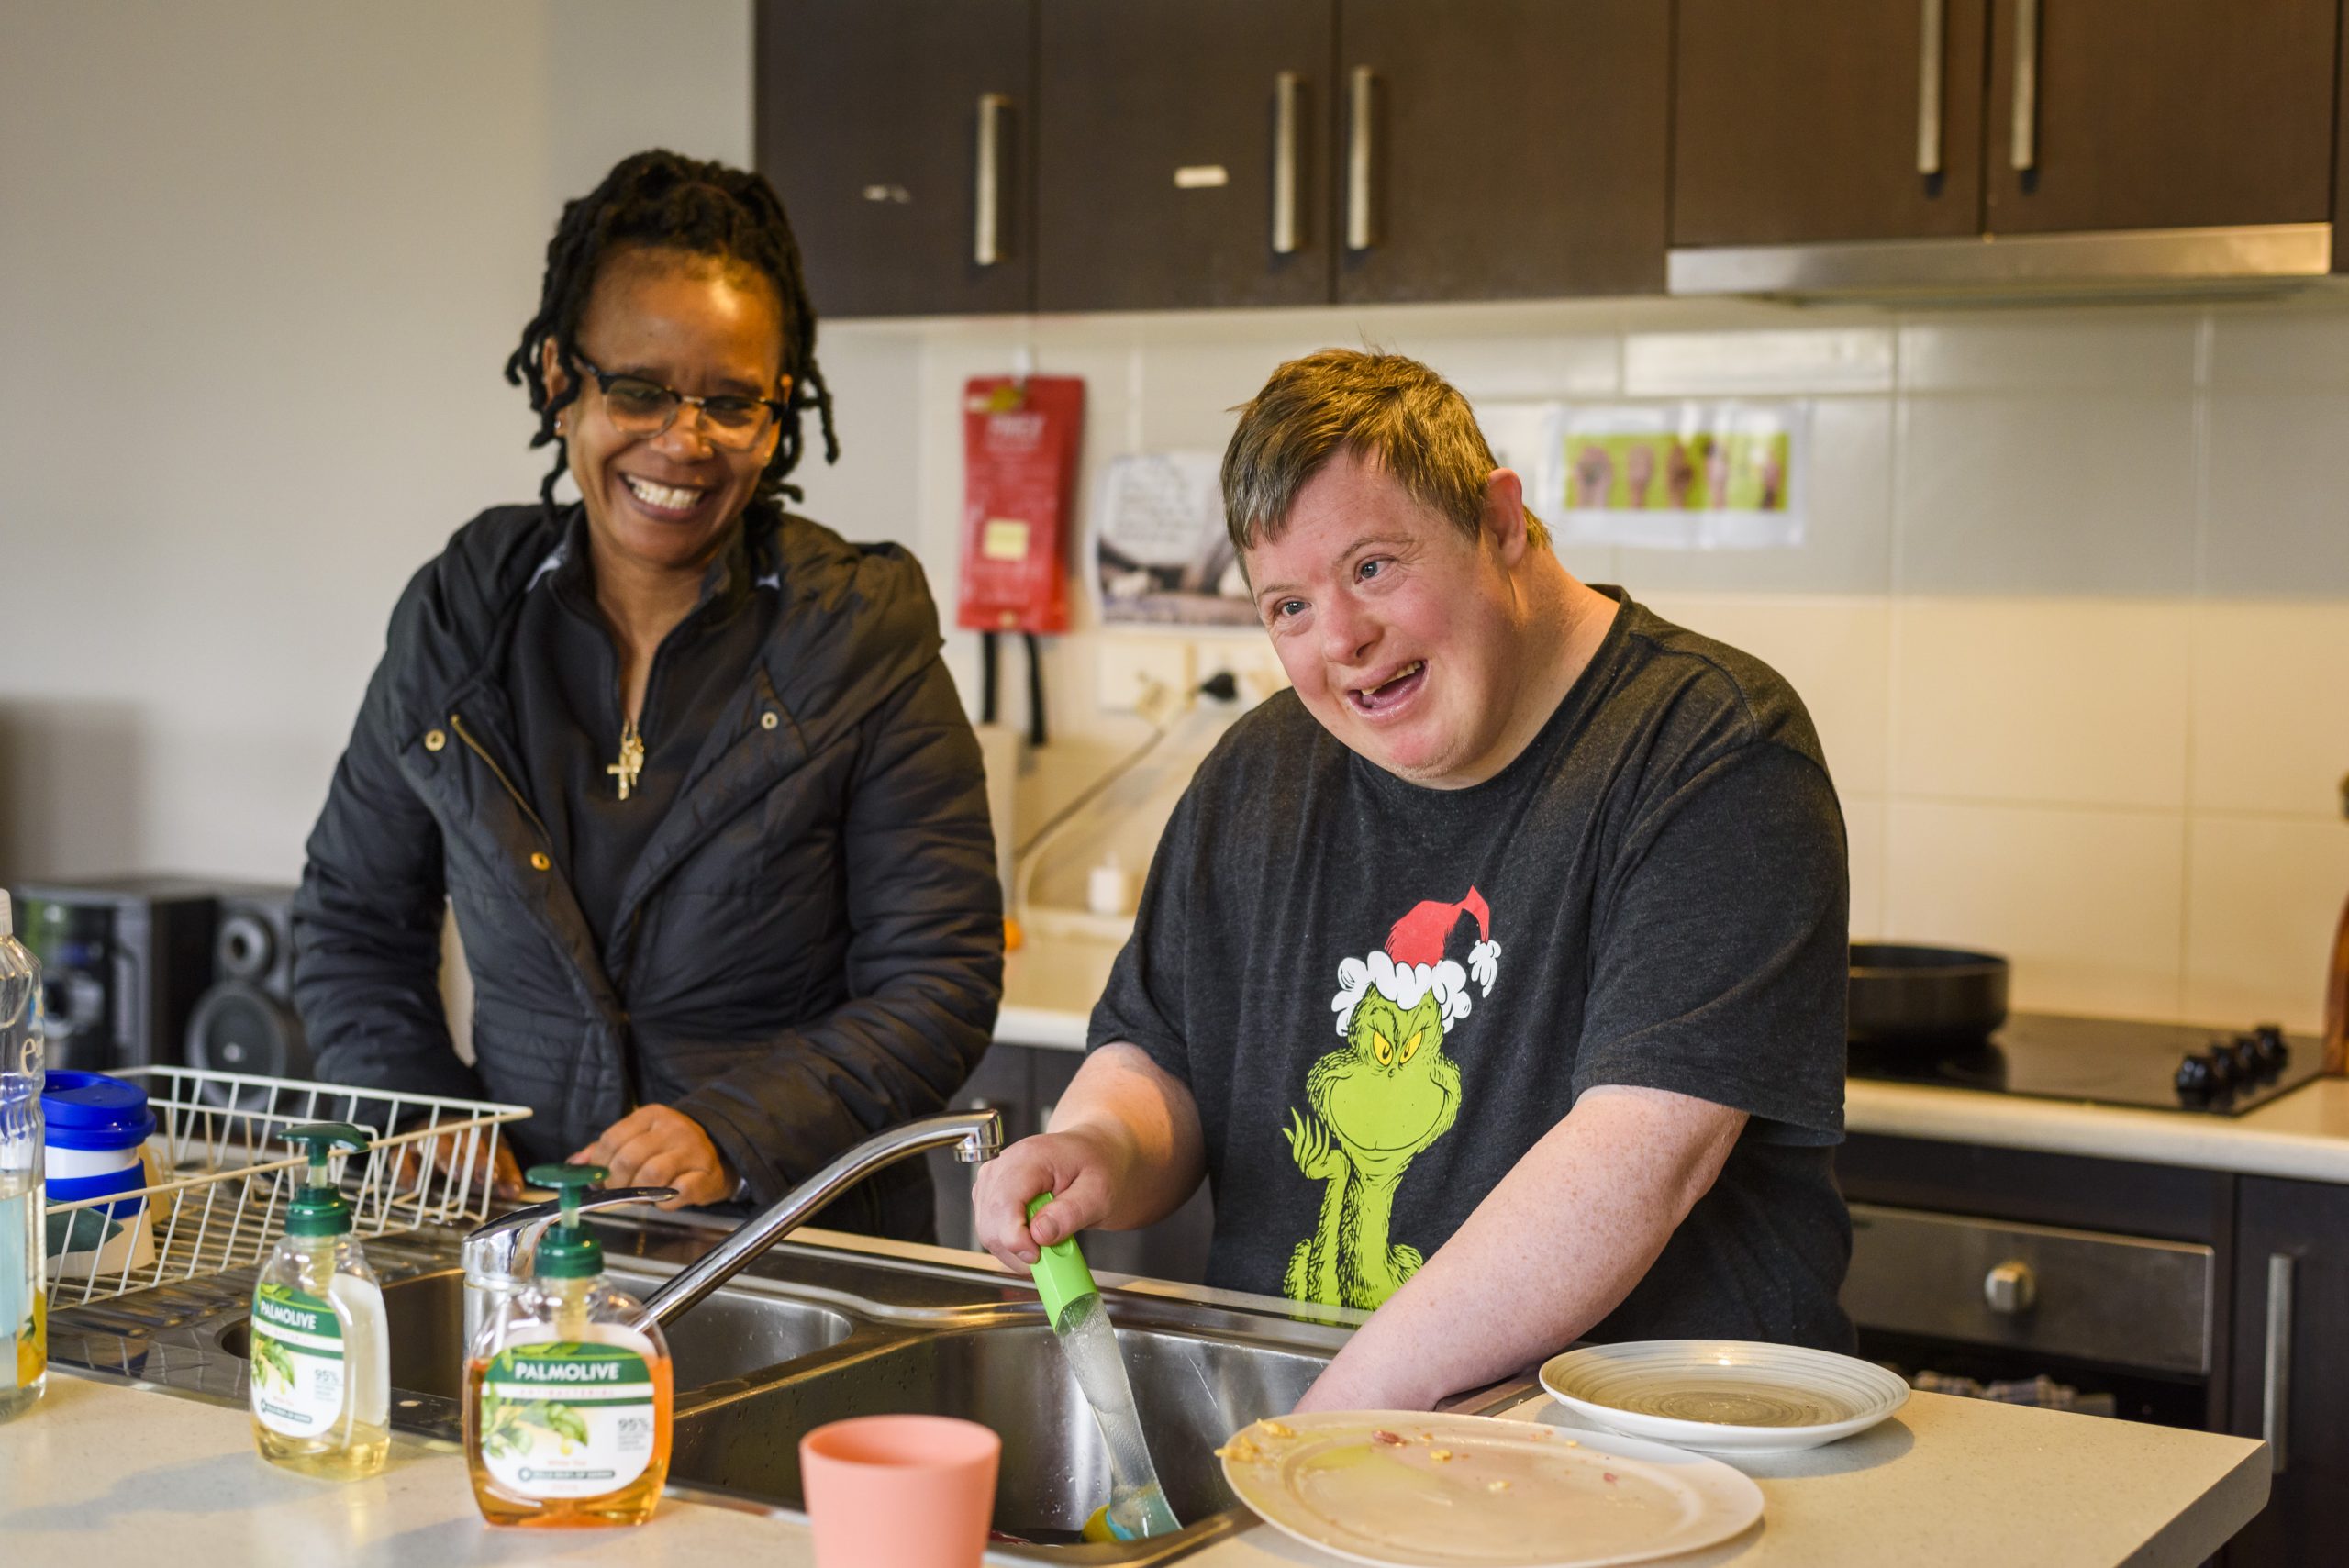 Looking for Supported Independent Living?